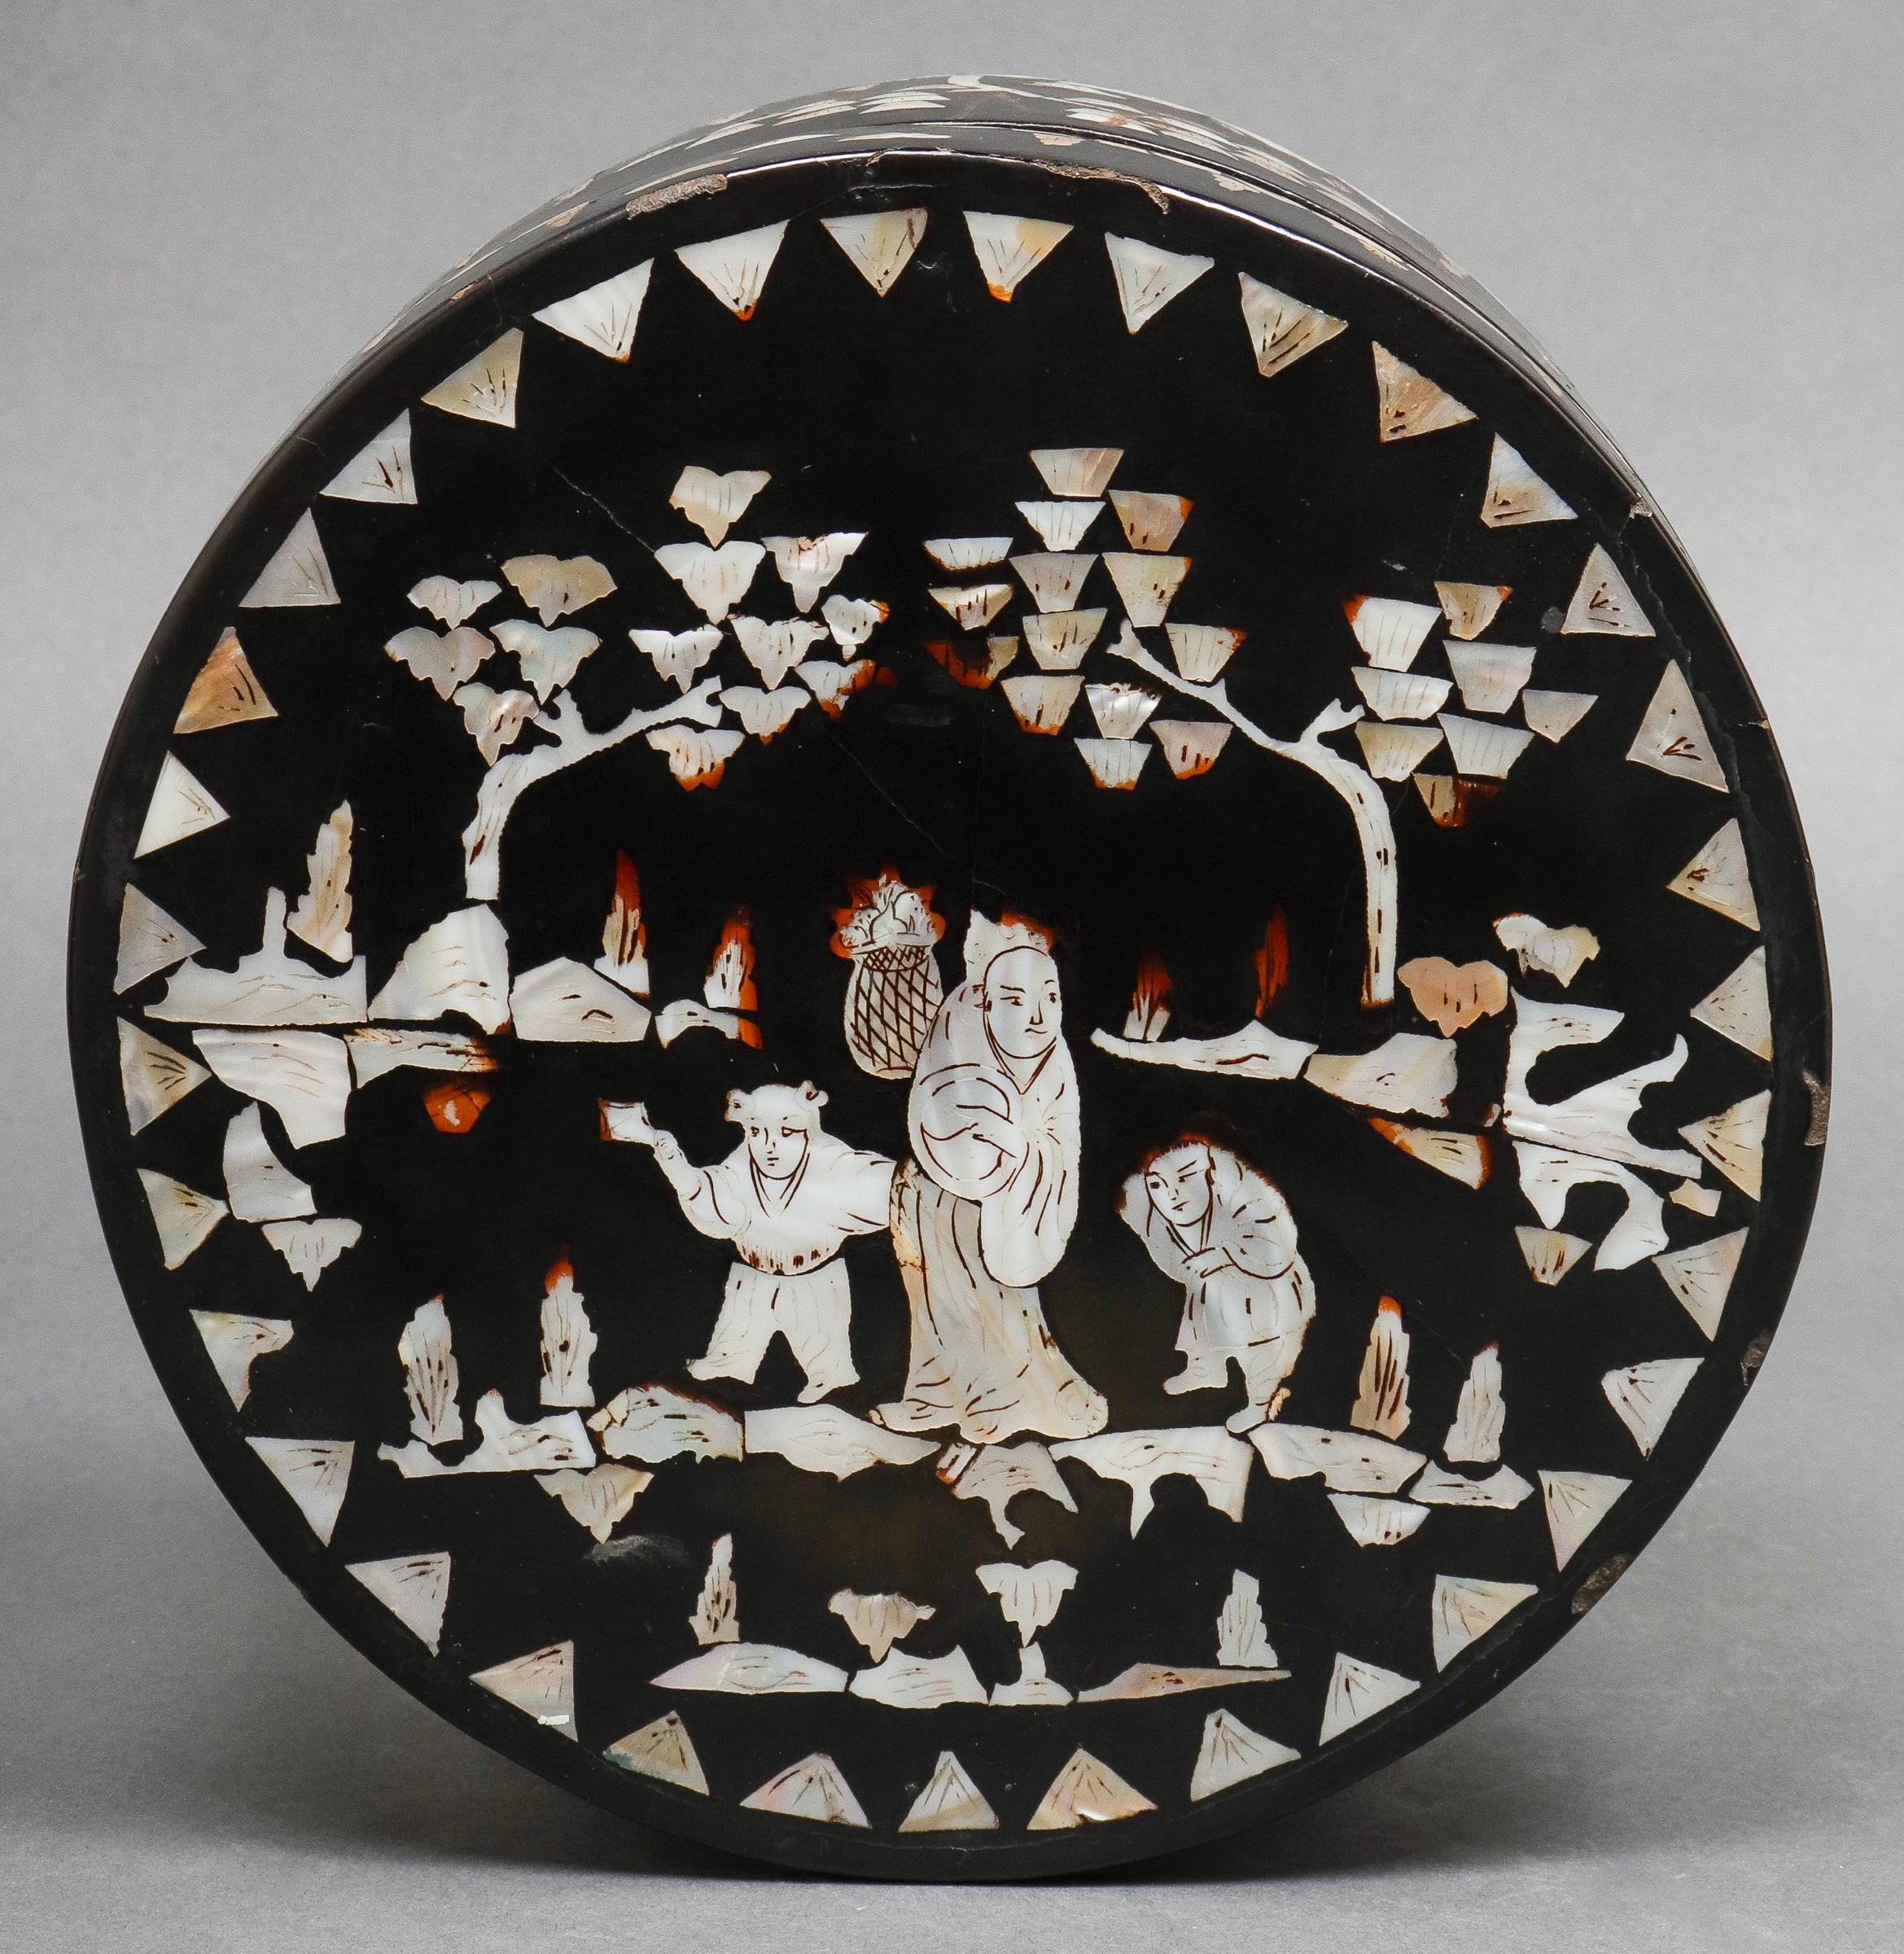 Chinese mother of pearl inlaid lacquered circular box, the cover depicting mother with two children with all-over landscape decoration, circa late 19th-early 20th century. Measures: 4